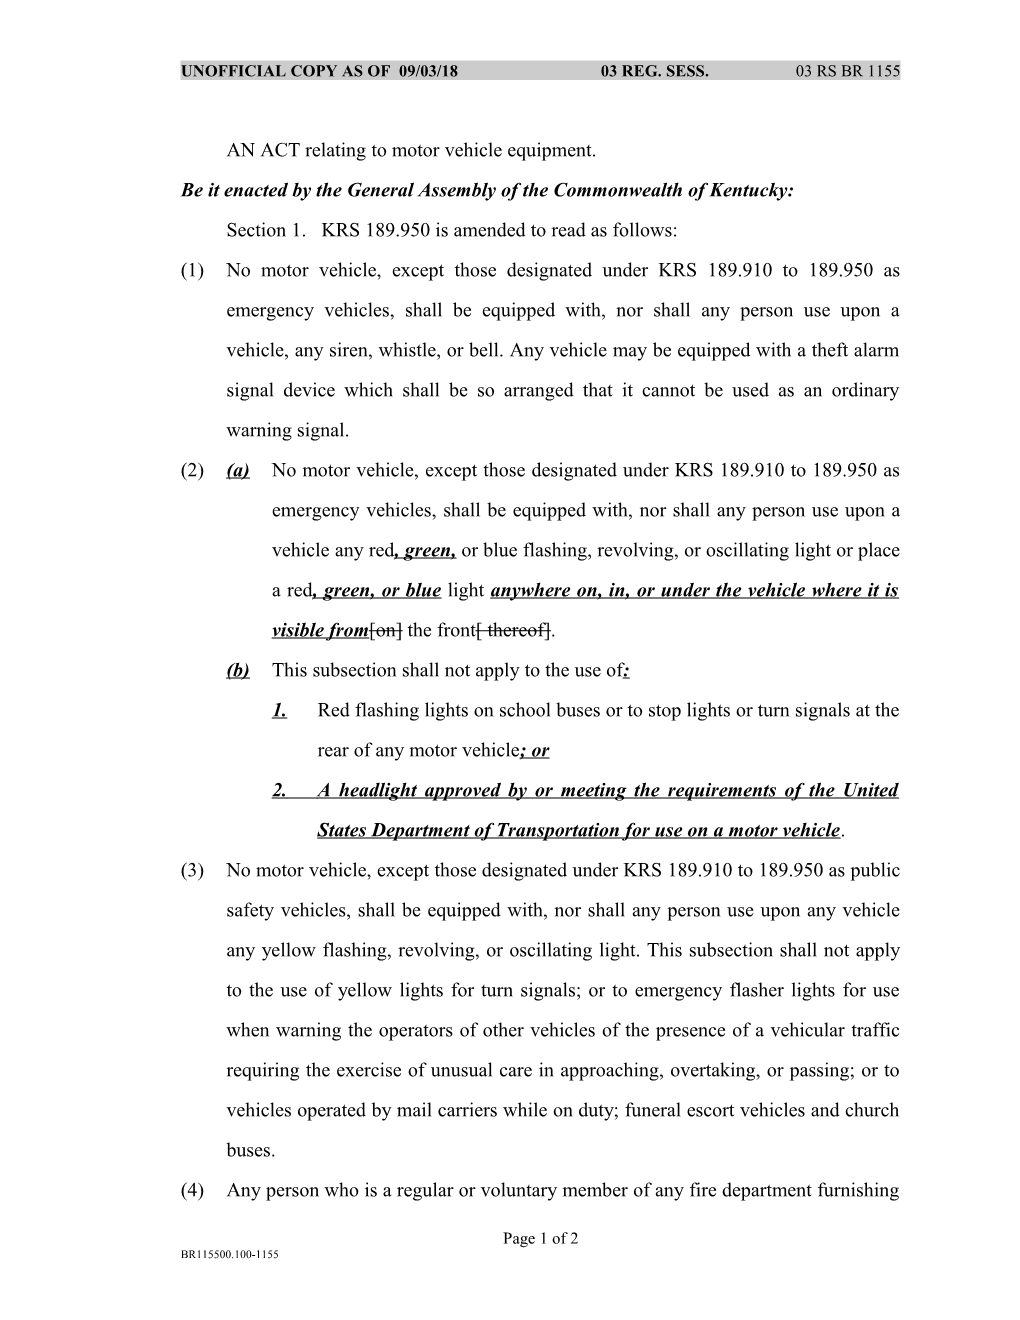 AN ACT Relating to Motor Vehicle Equipment